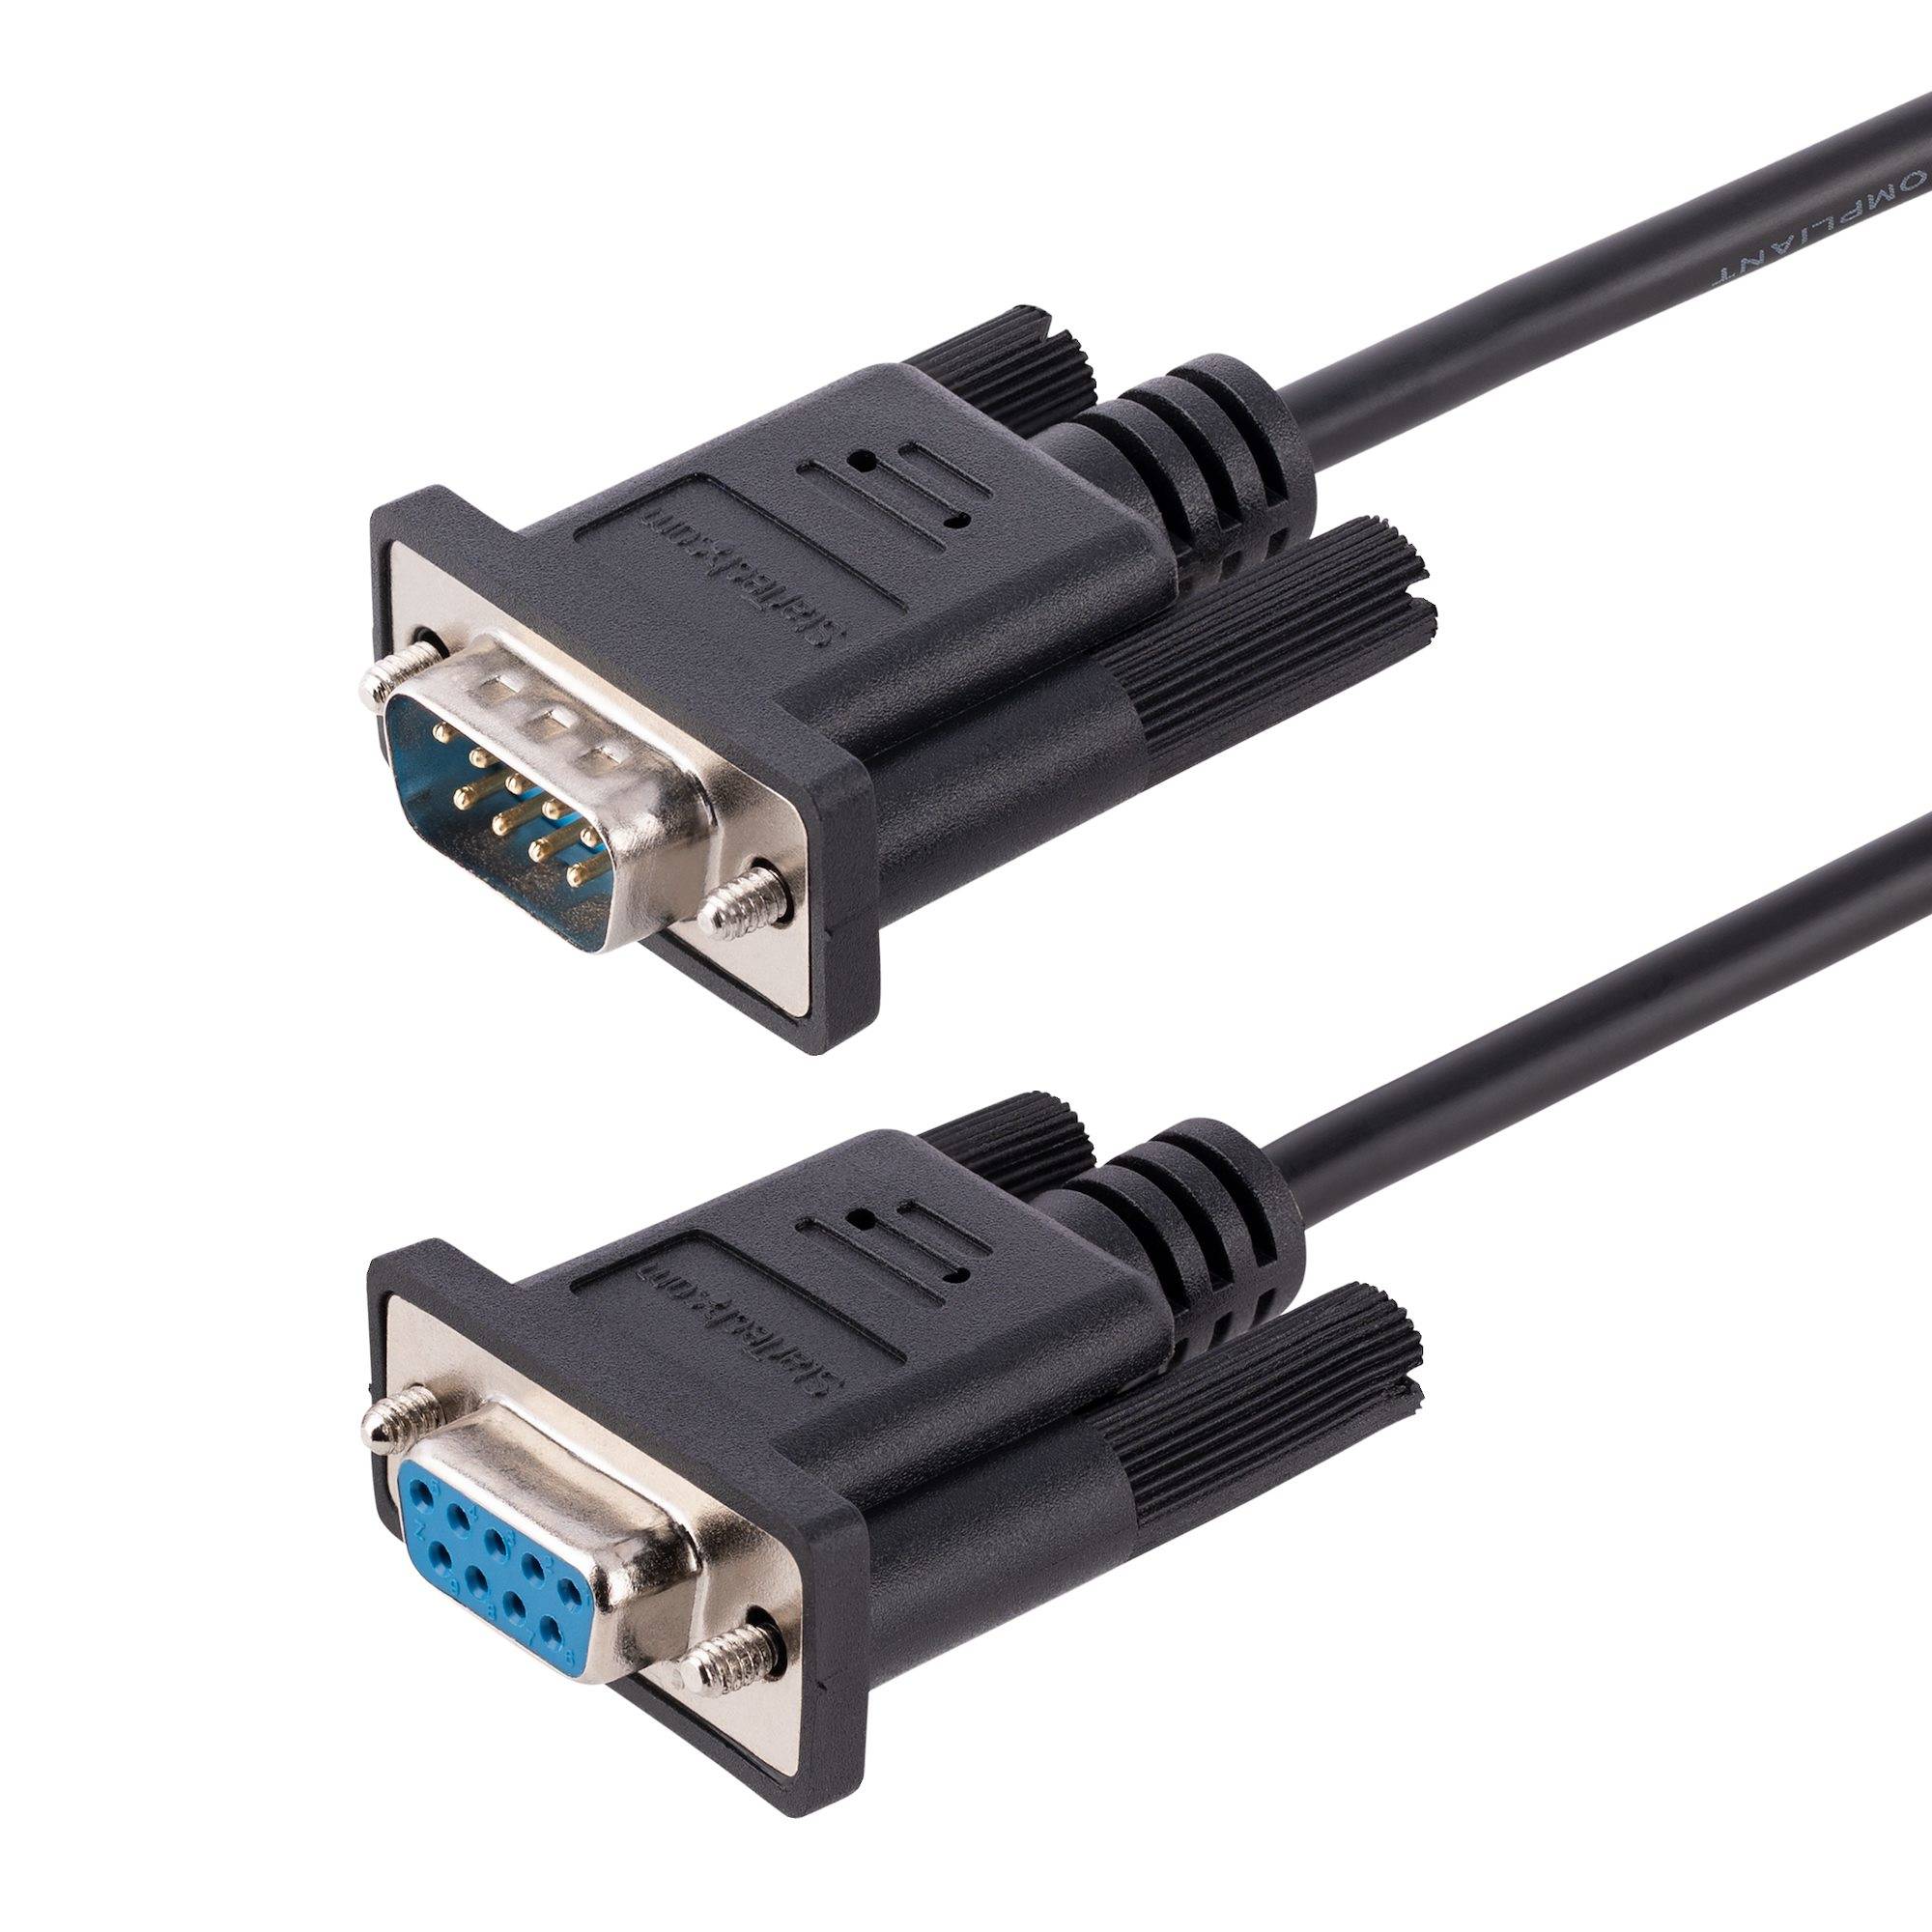 Rca Informatique - image du produit : RS232 SERIAL NULL MODEM CABLE - 3M CROSSOVER SERIAL CABLE